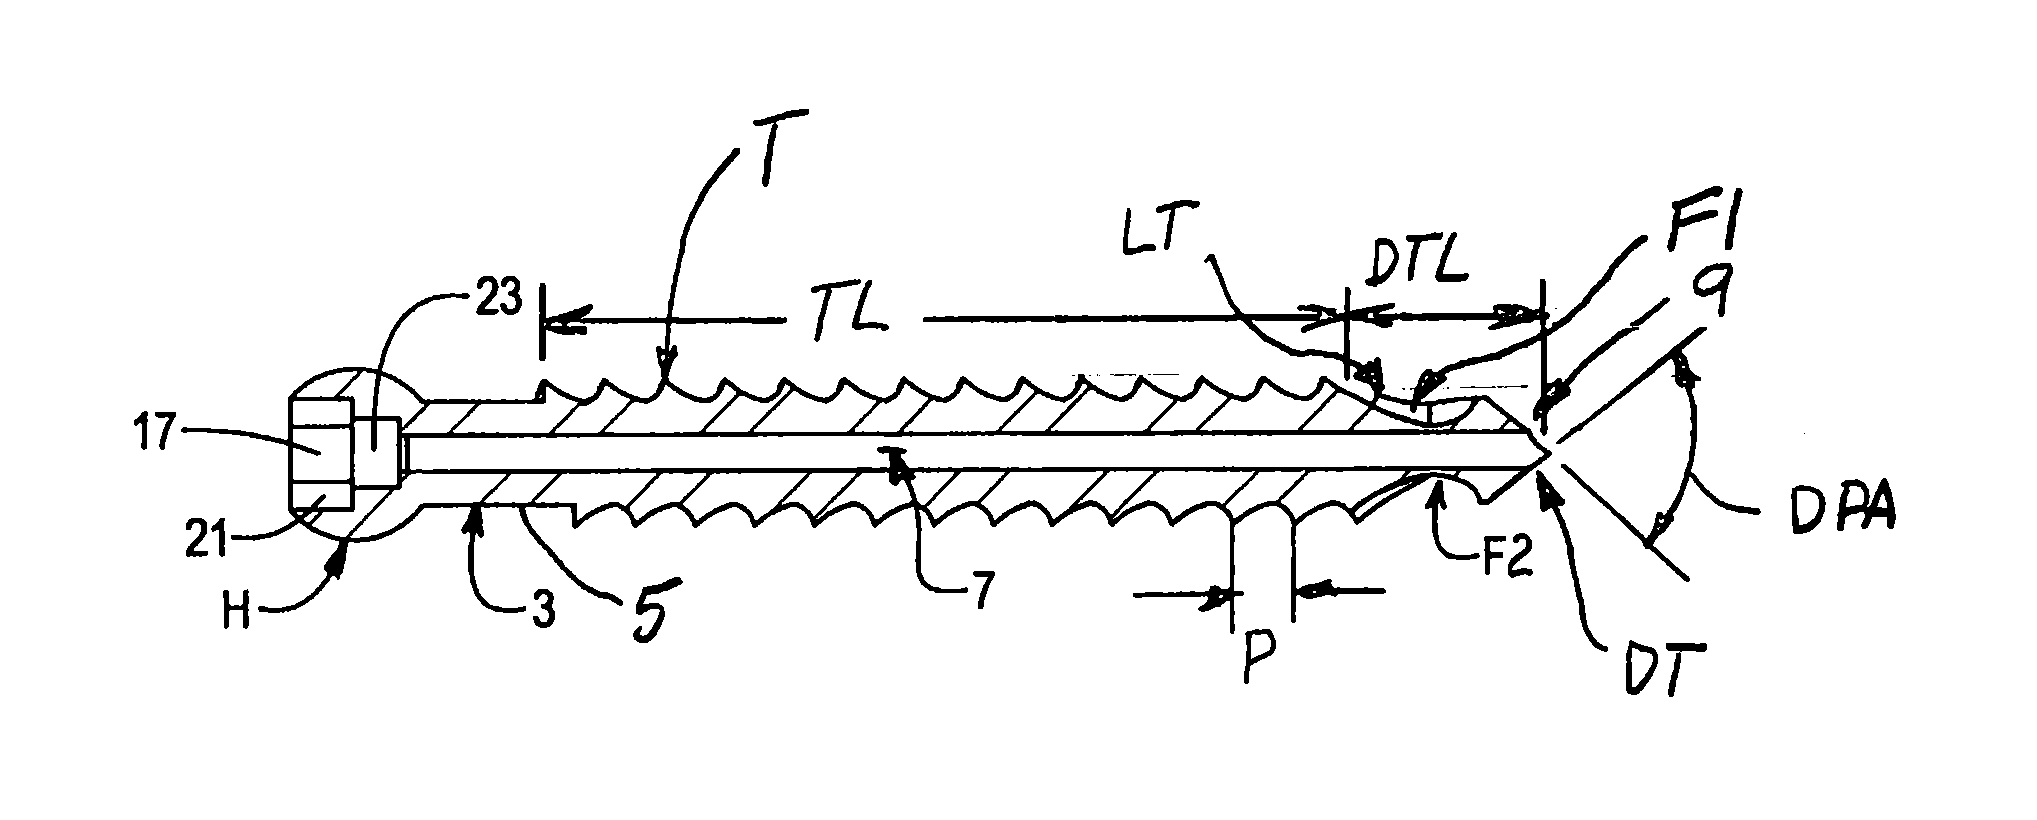 Self drilling, self-tapping bone screw and method of installing for bicortical purchase